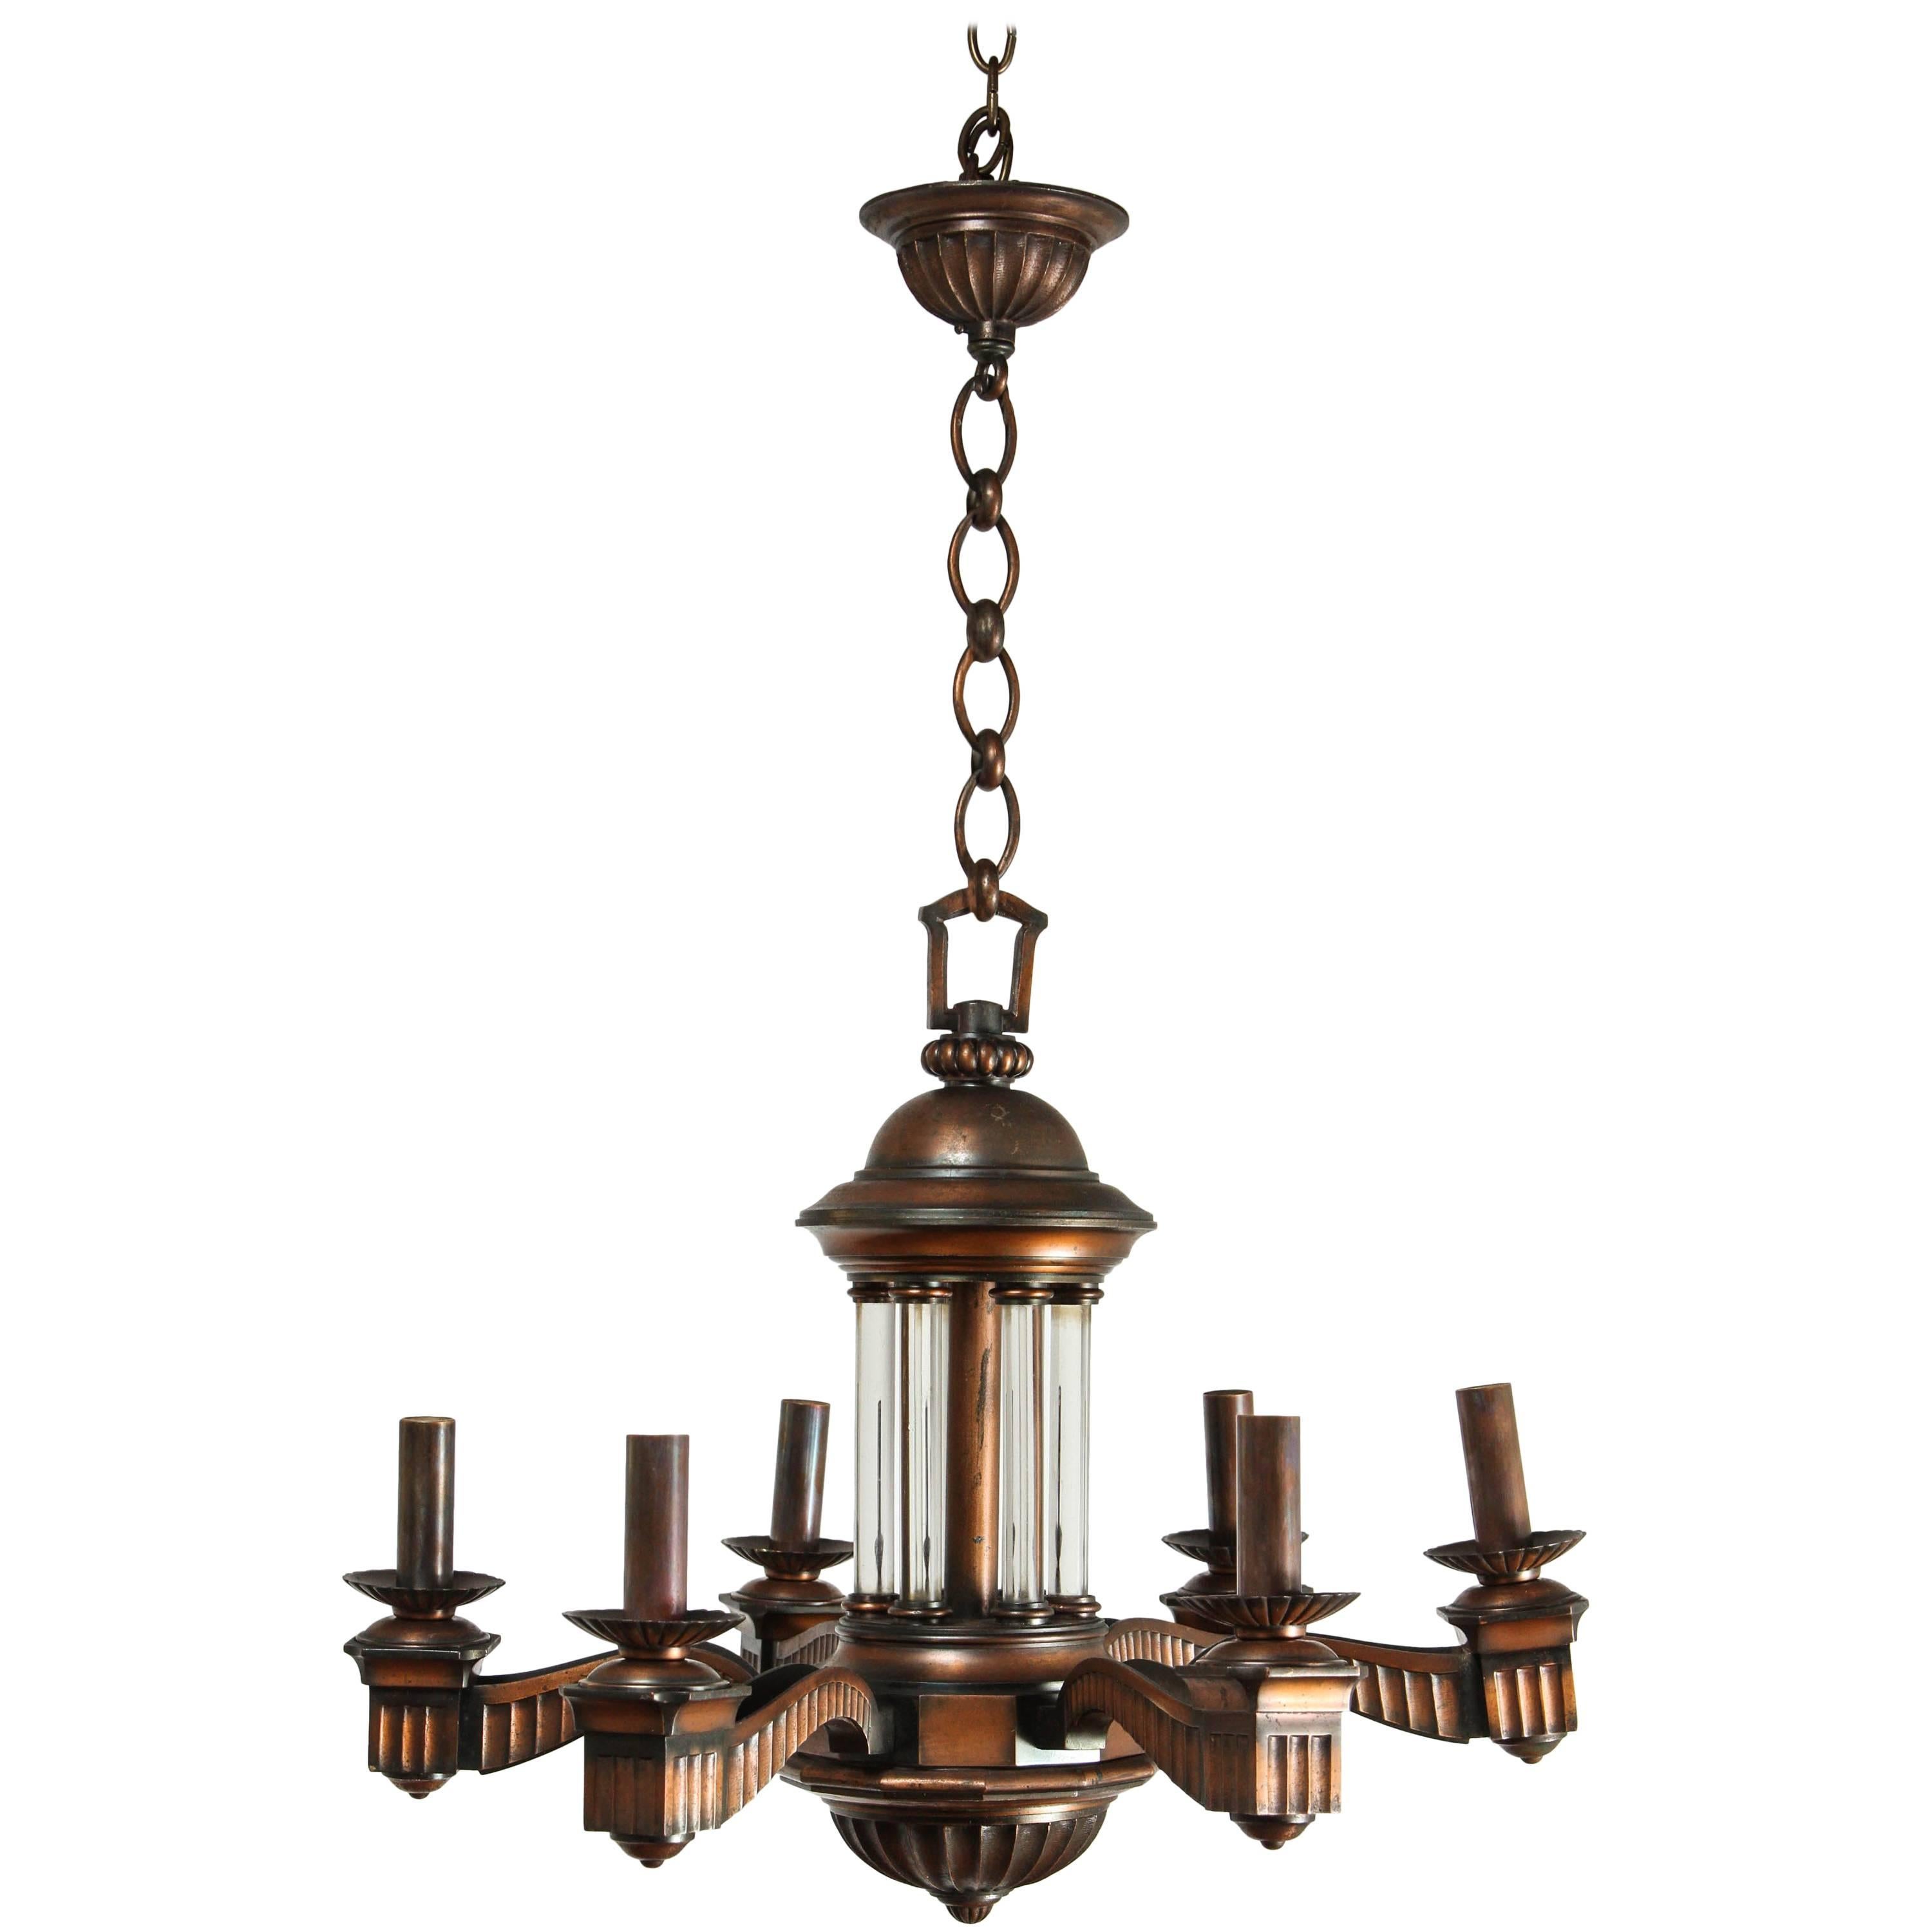 American Bronze and Glass Neoclassical Chandelier